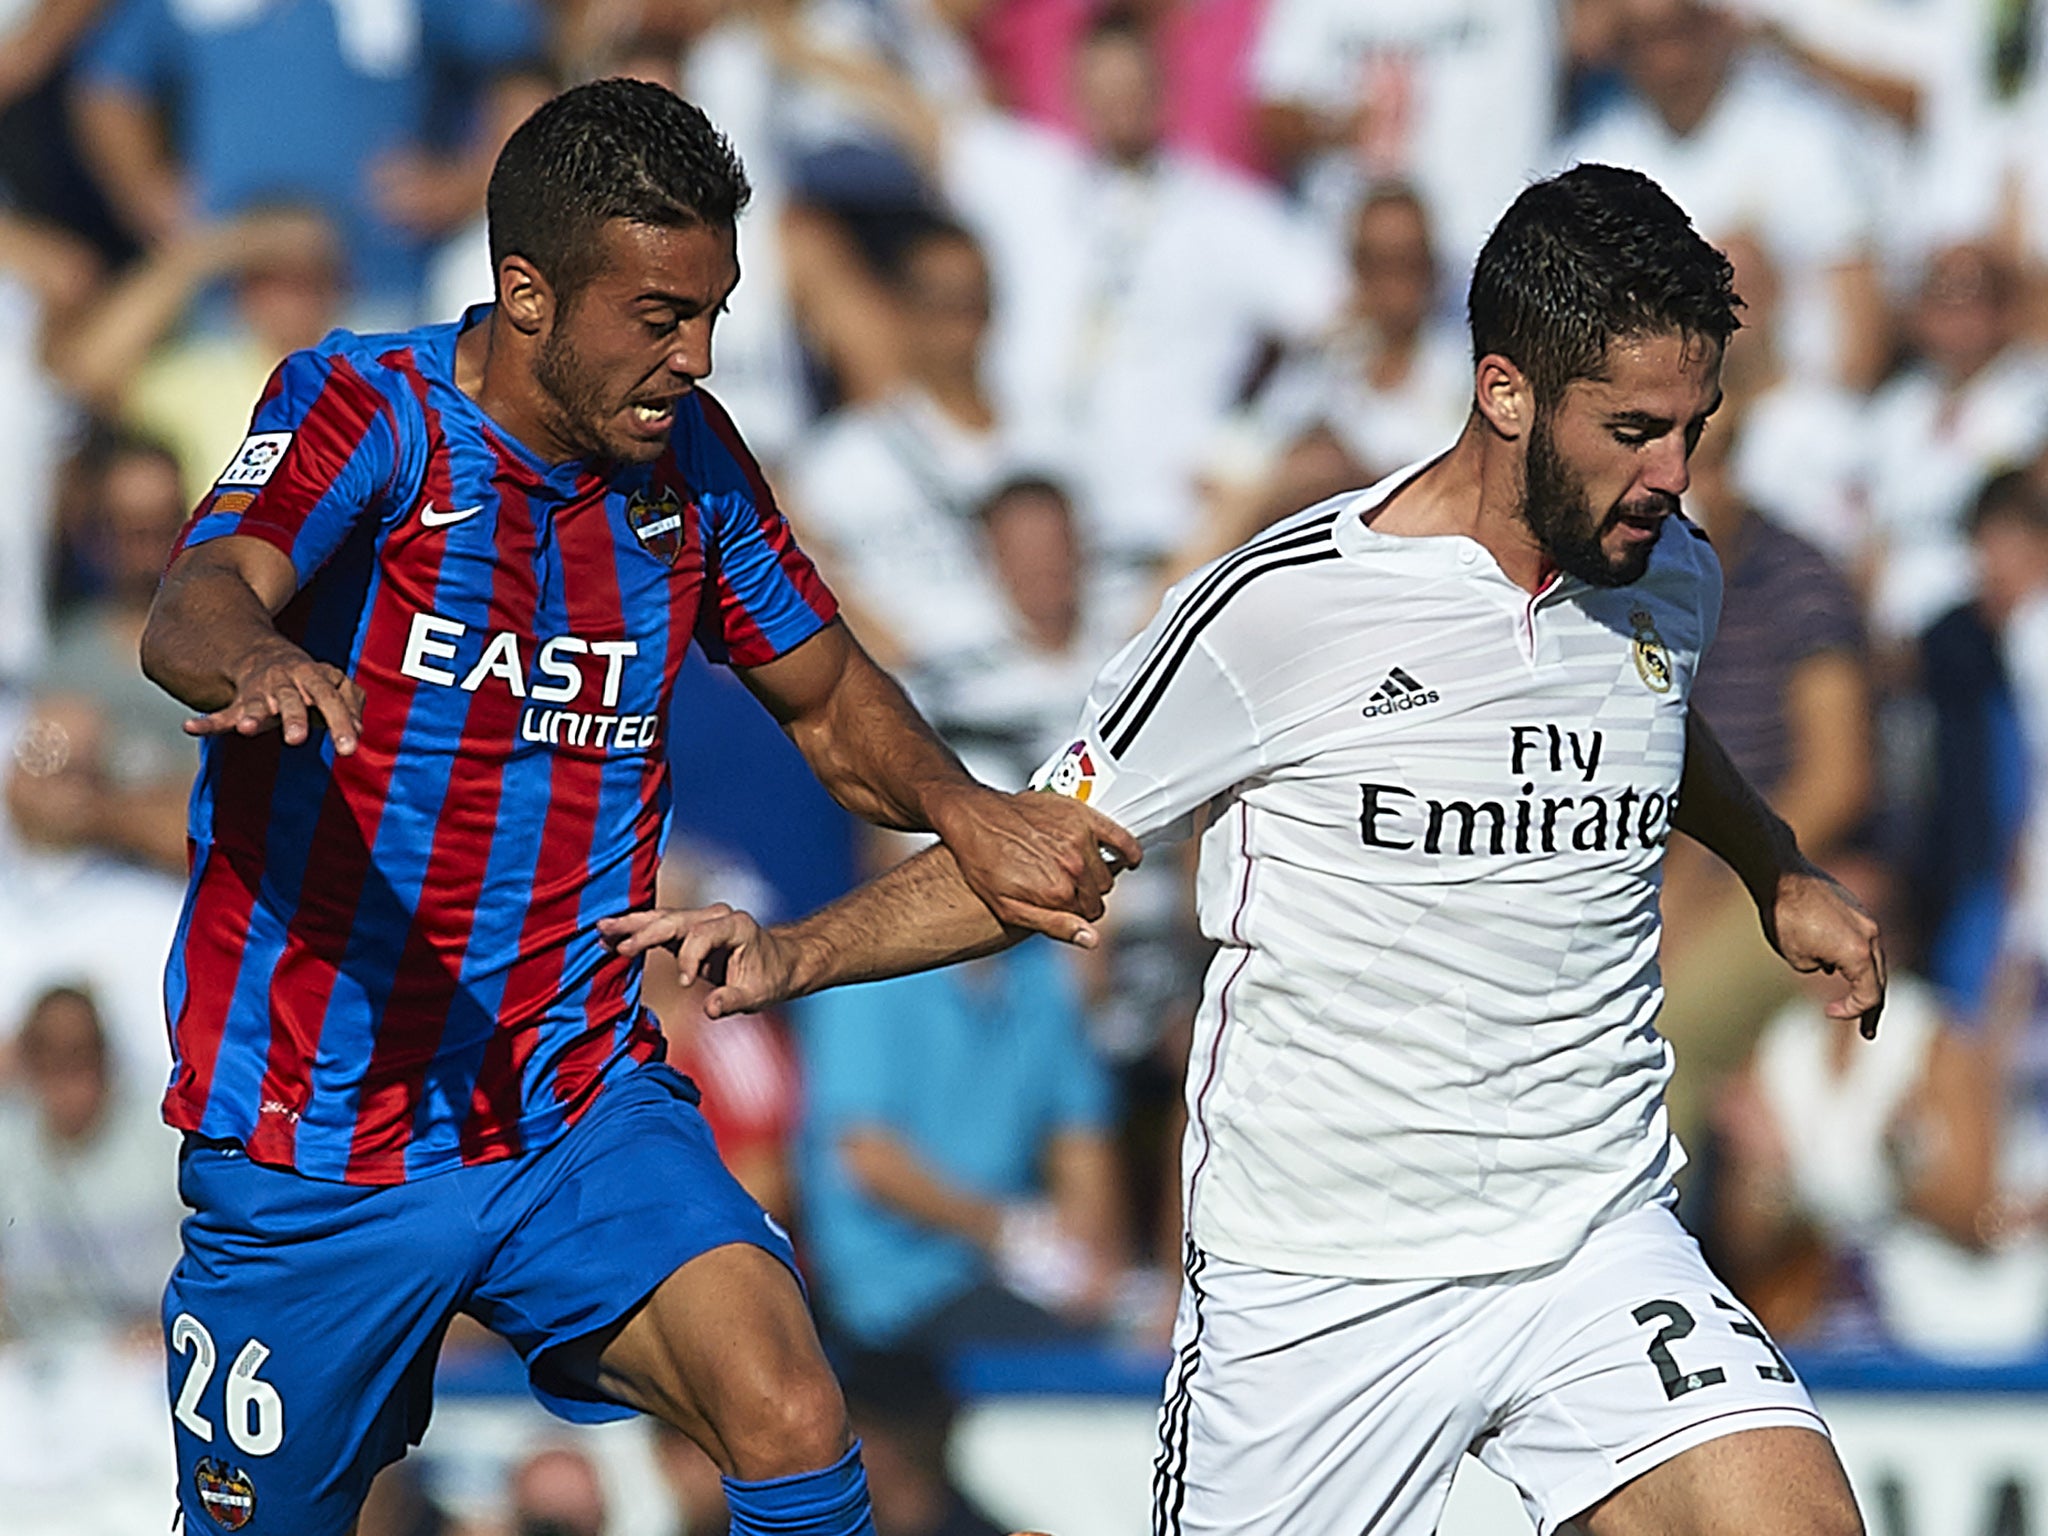 Levante's Victor Camarasa comes up against Real Madrid's Isco